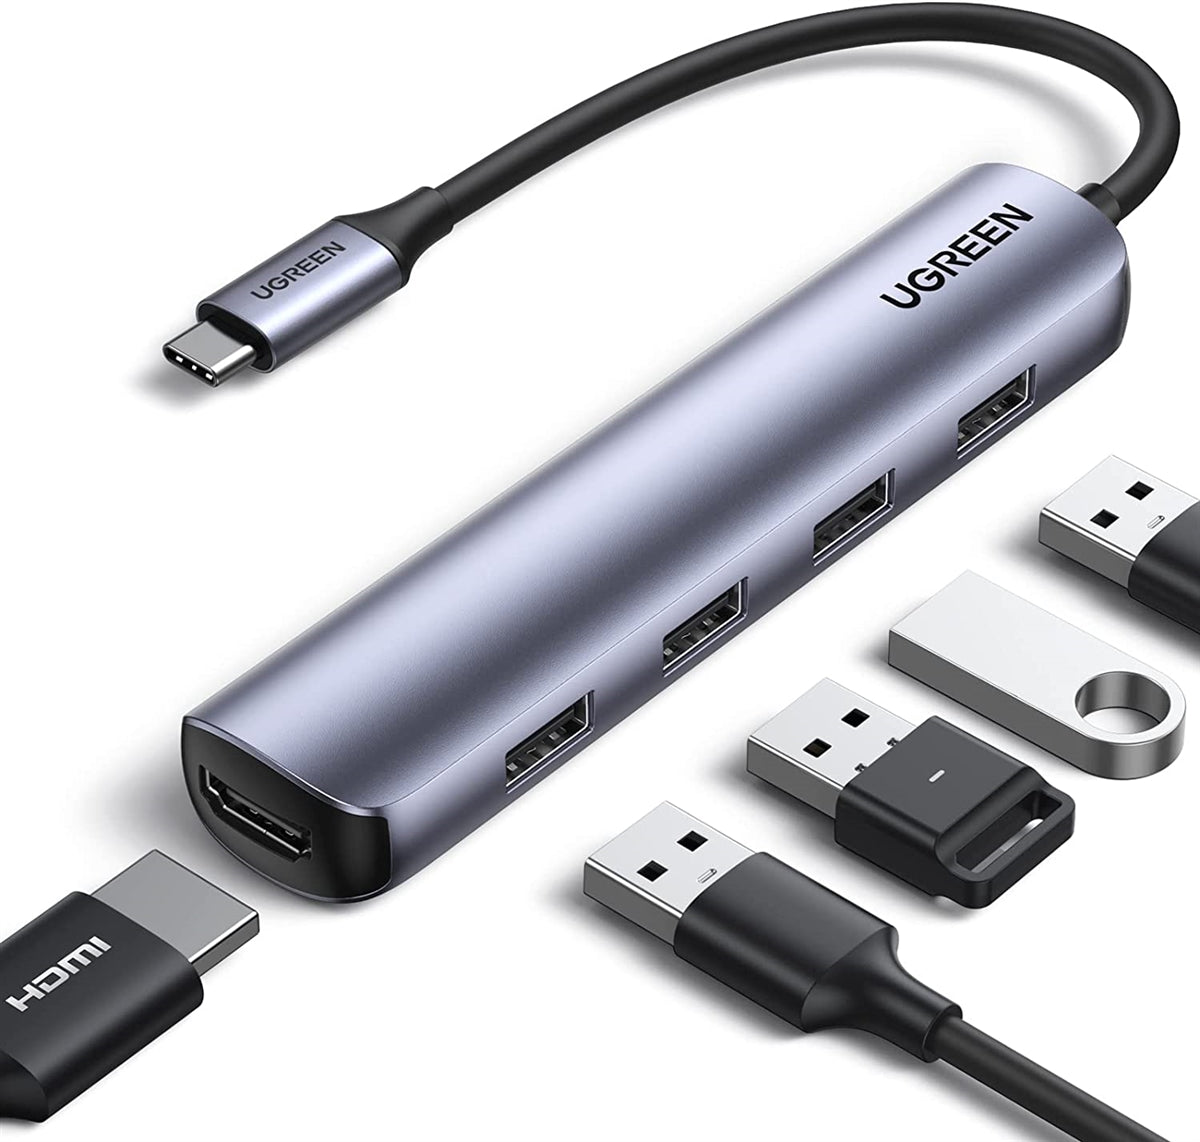 UGREEN 20197 5 in 1 USB-C to 4*USB 3.0 + 4K HDMI Adapter